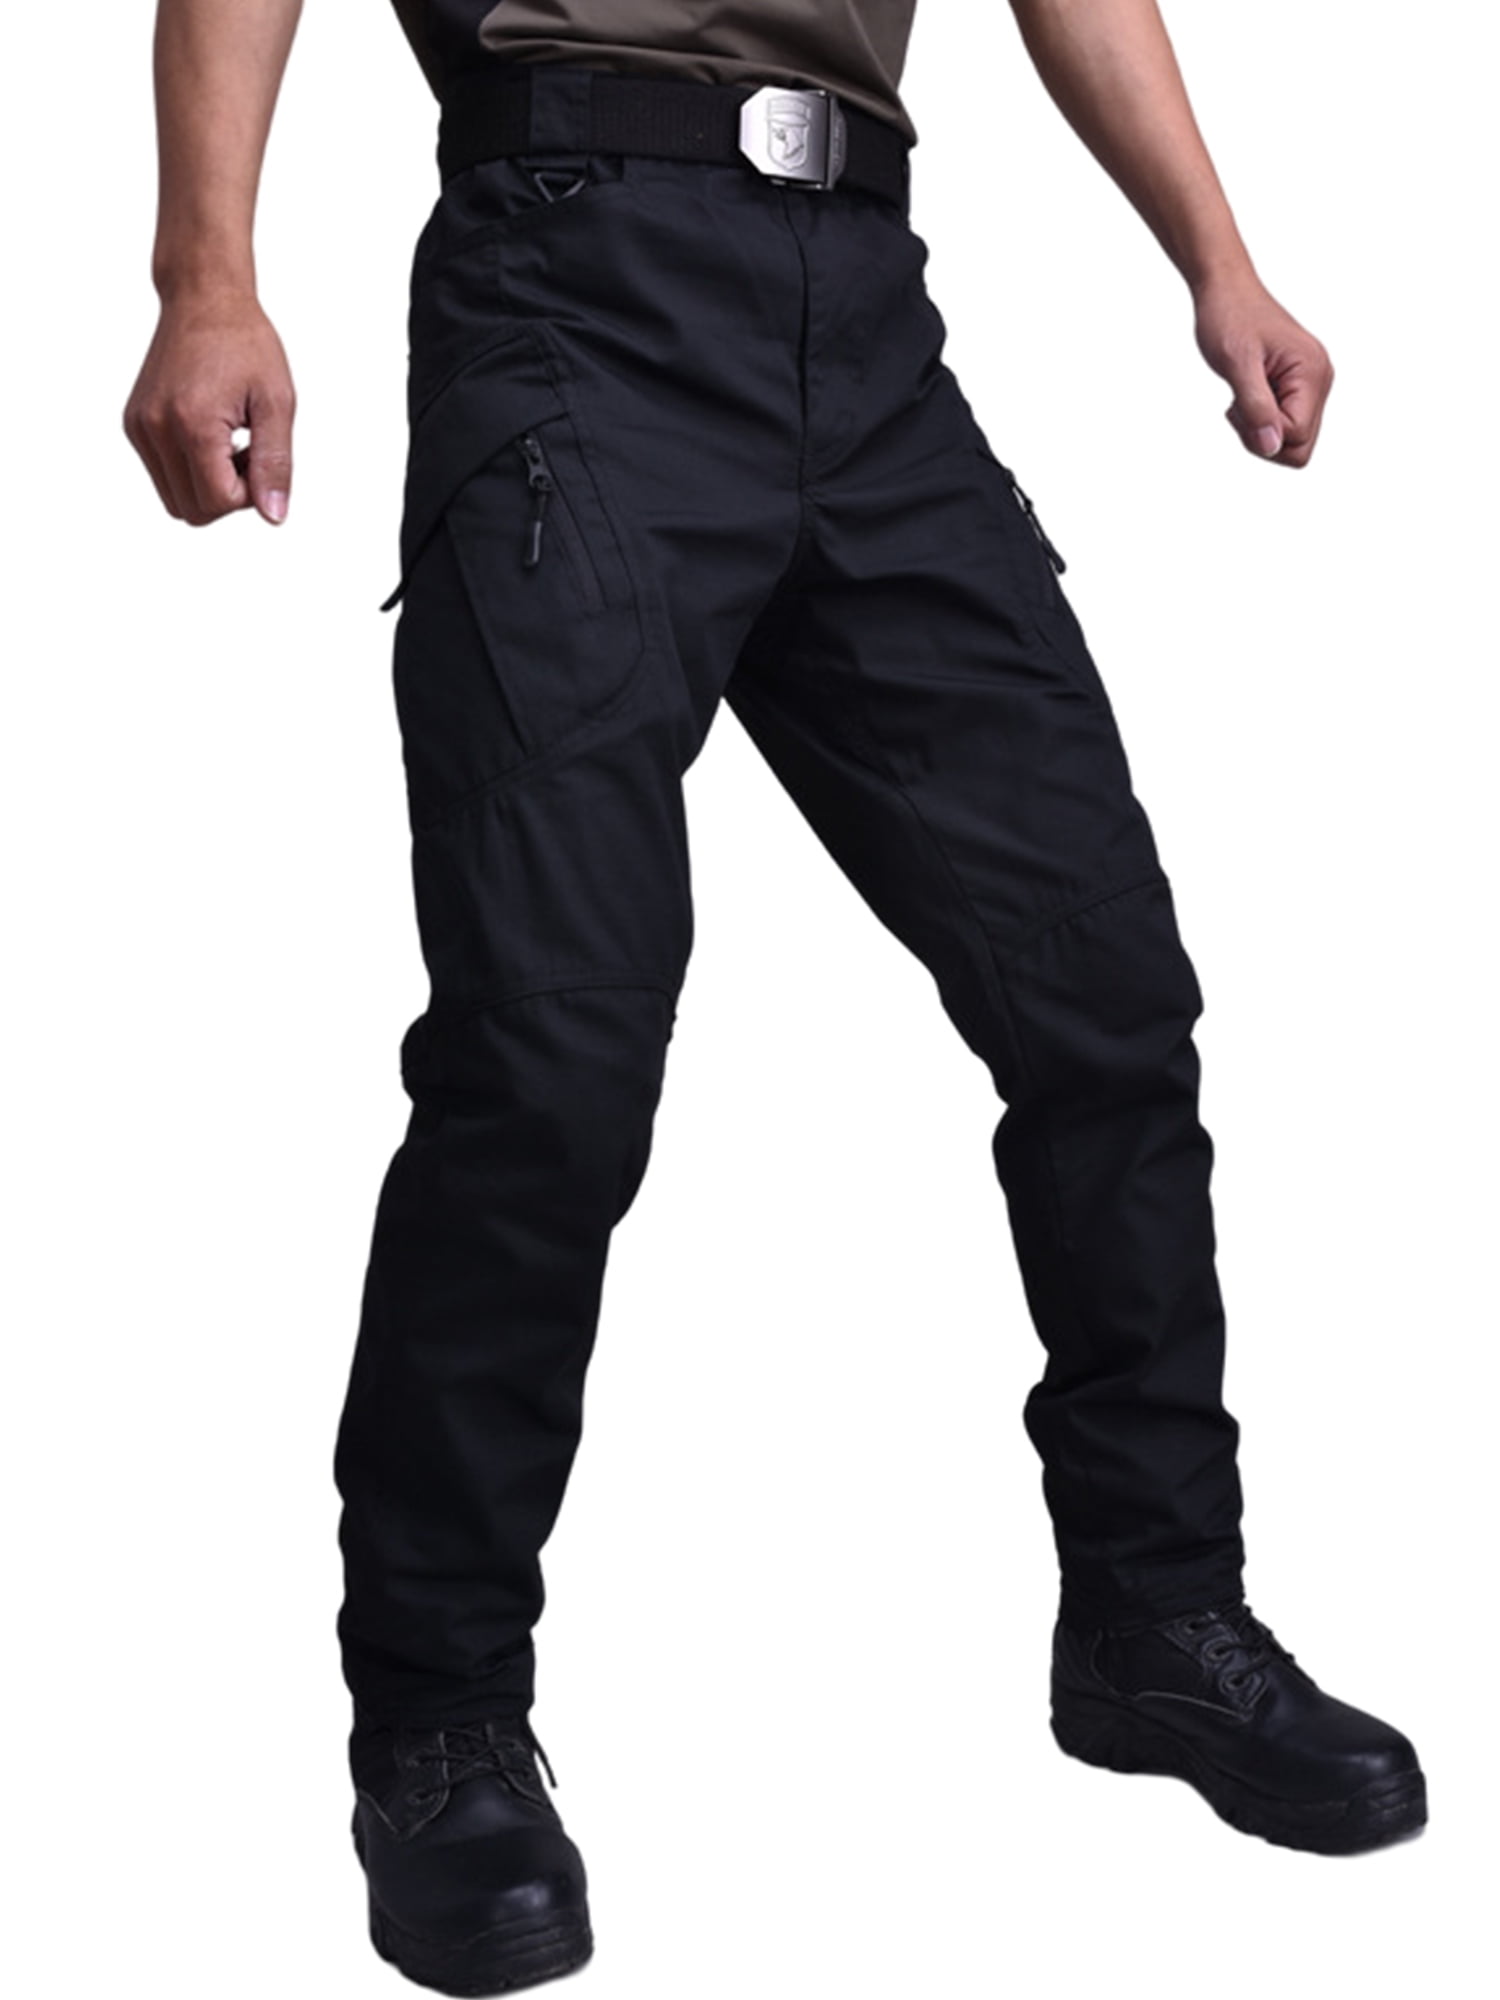 Mens Military Tactical Cargo Pants Work Camping Trousers for Outdoor Sports 